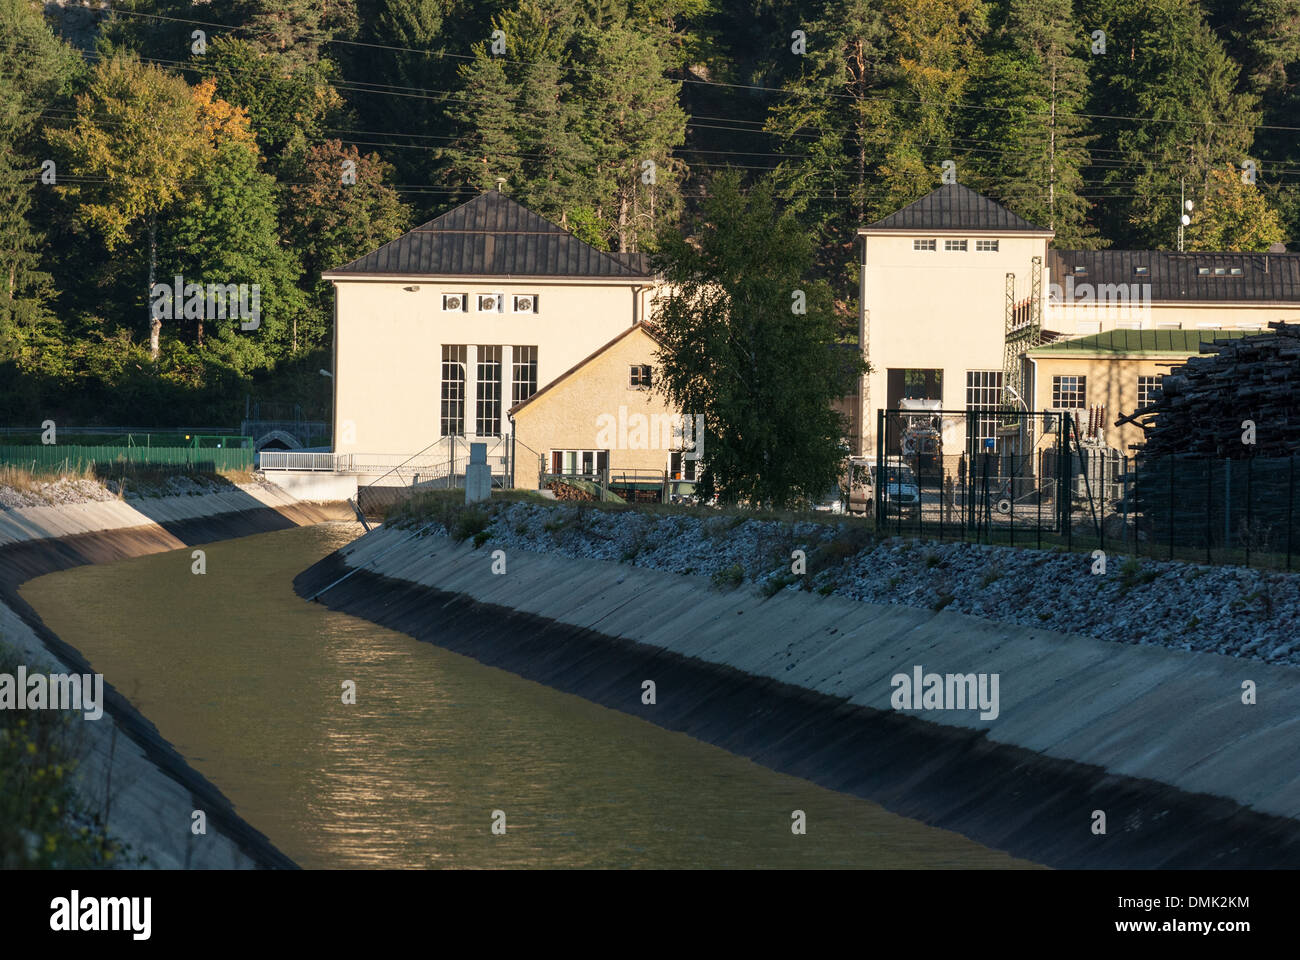 Achensee power station in Jenbach shortly after sunrise Stock Photo